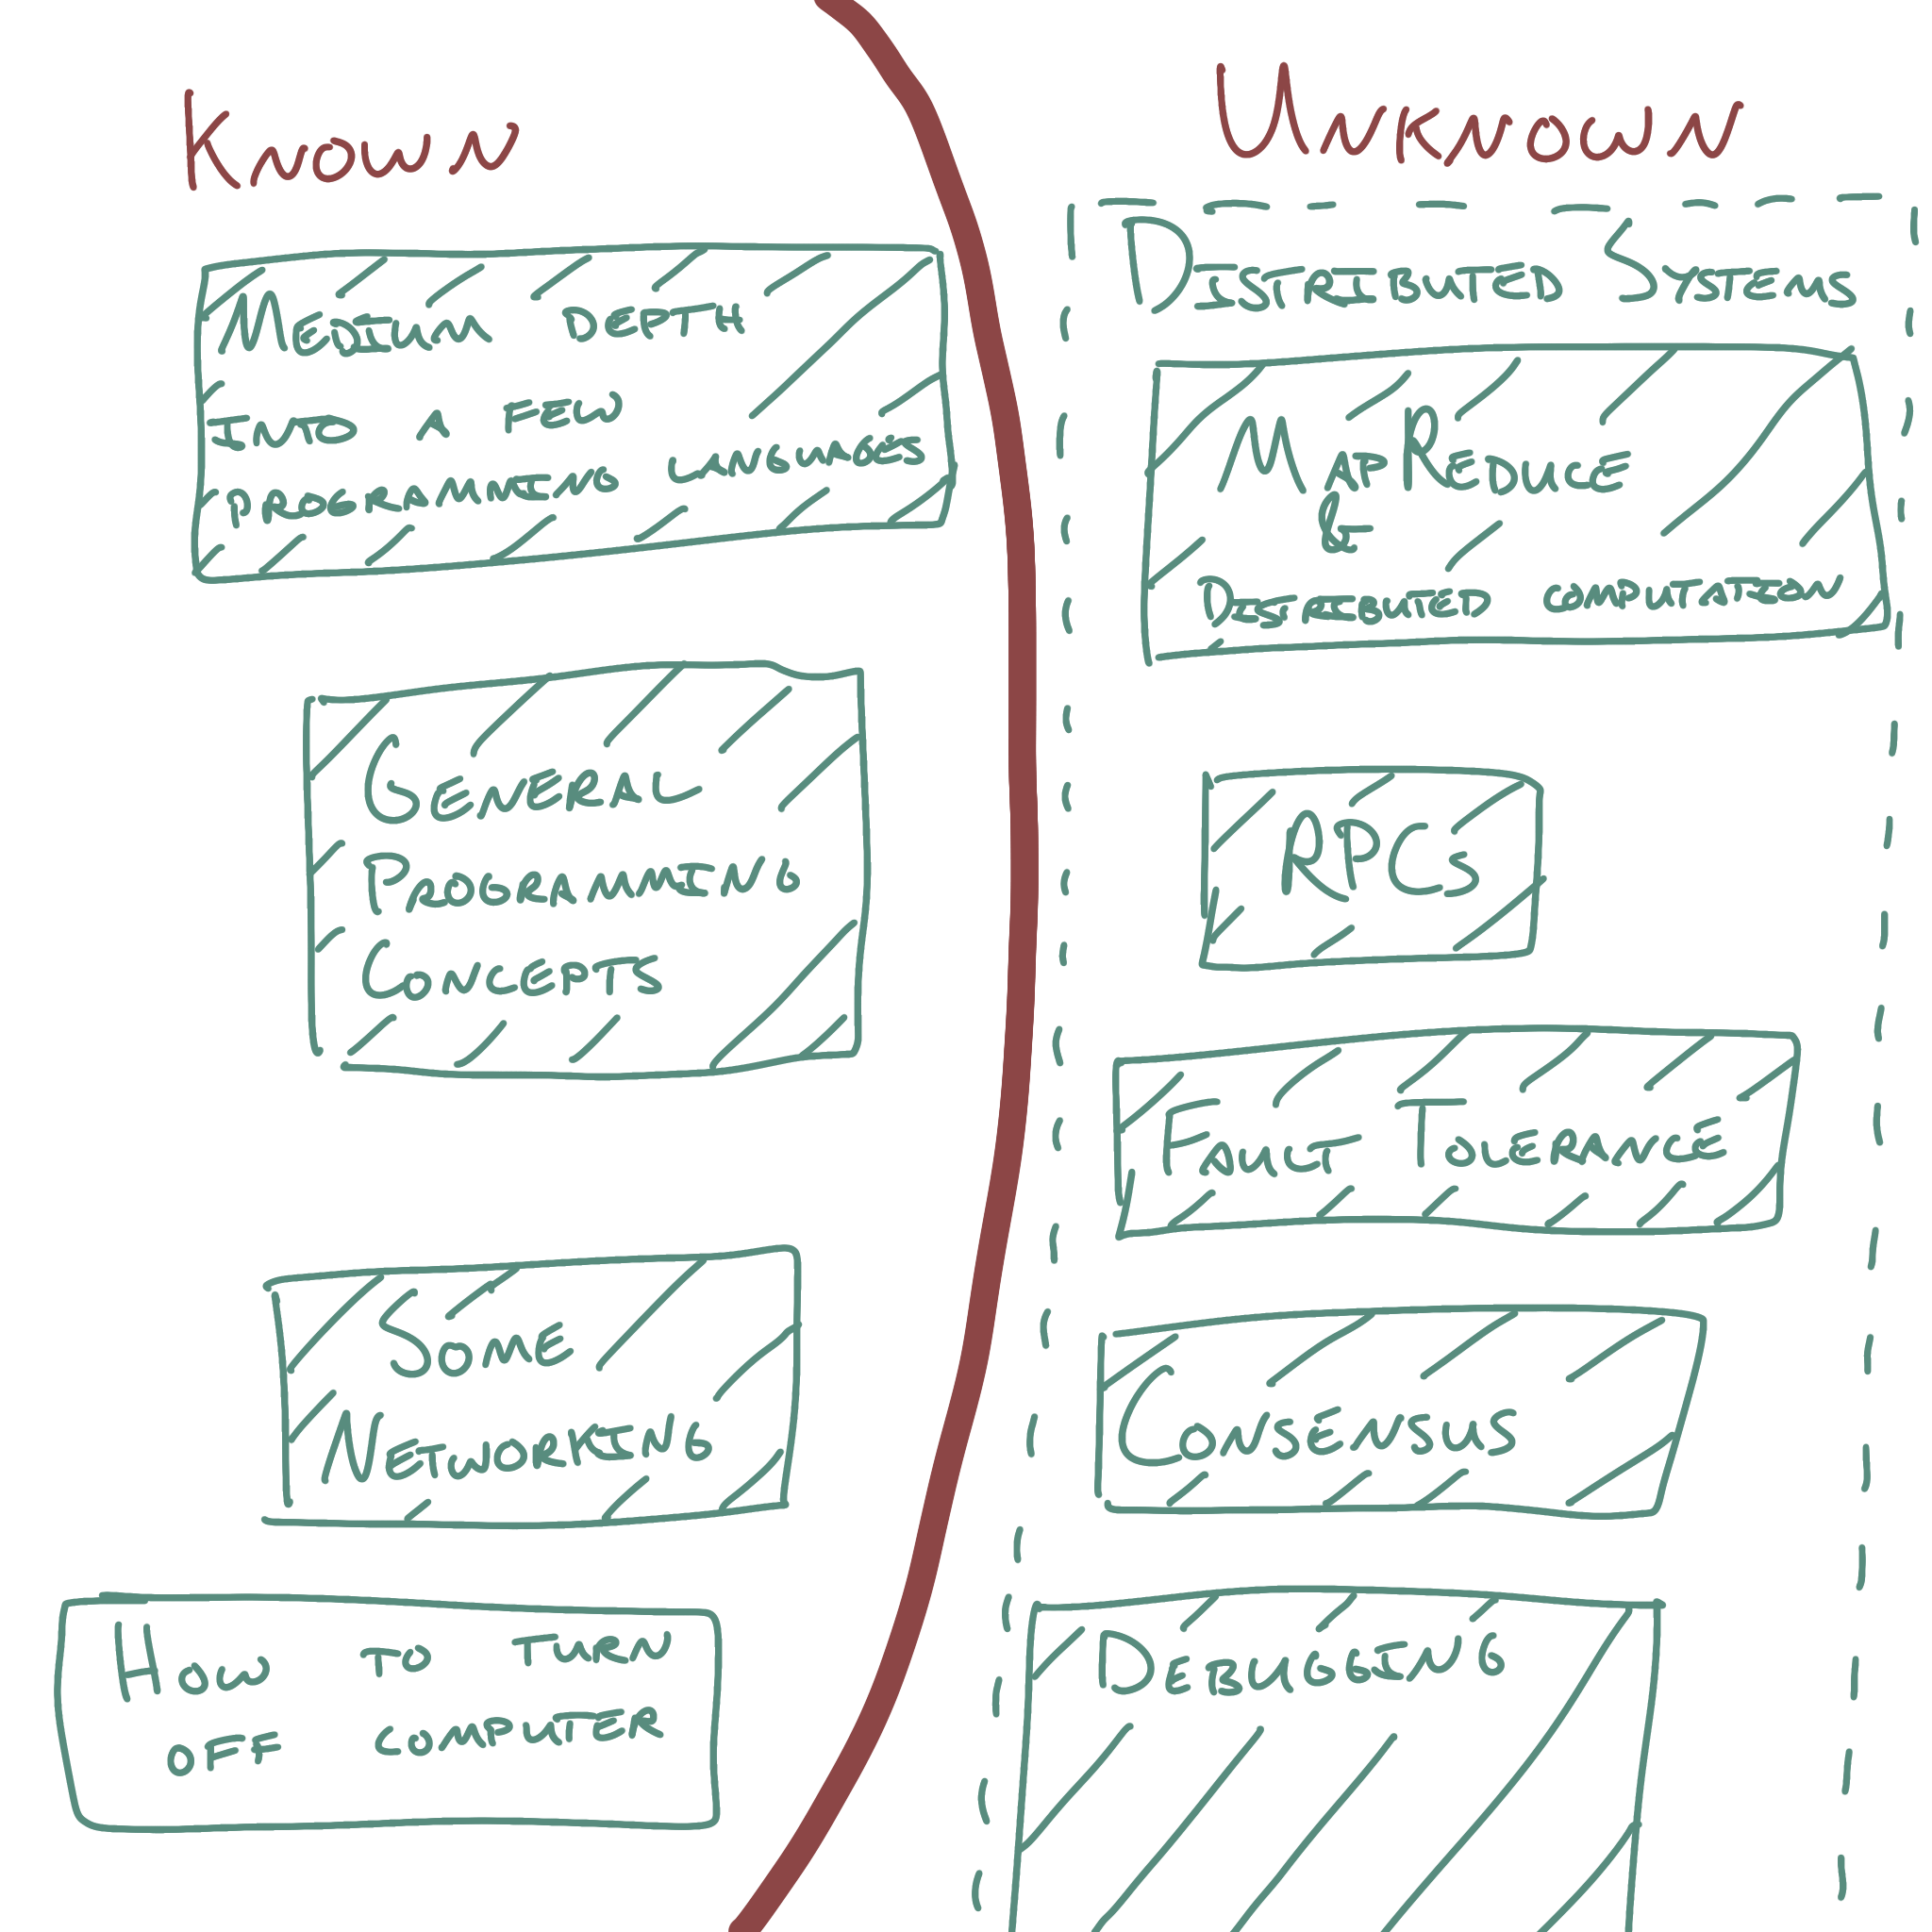 A few programming things I know and many distributed systems concepts in the unknown